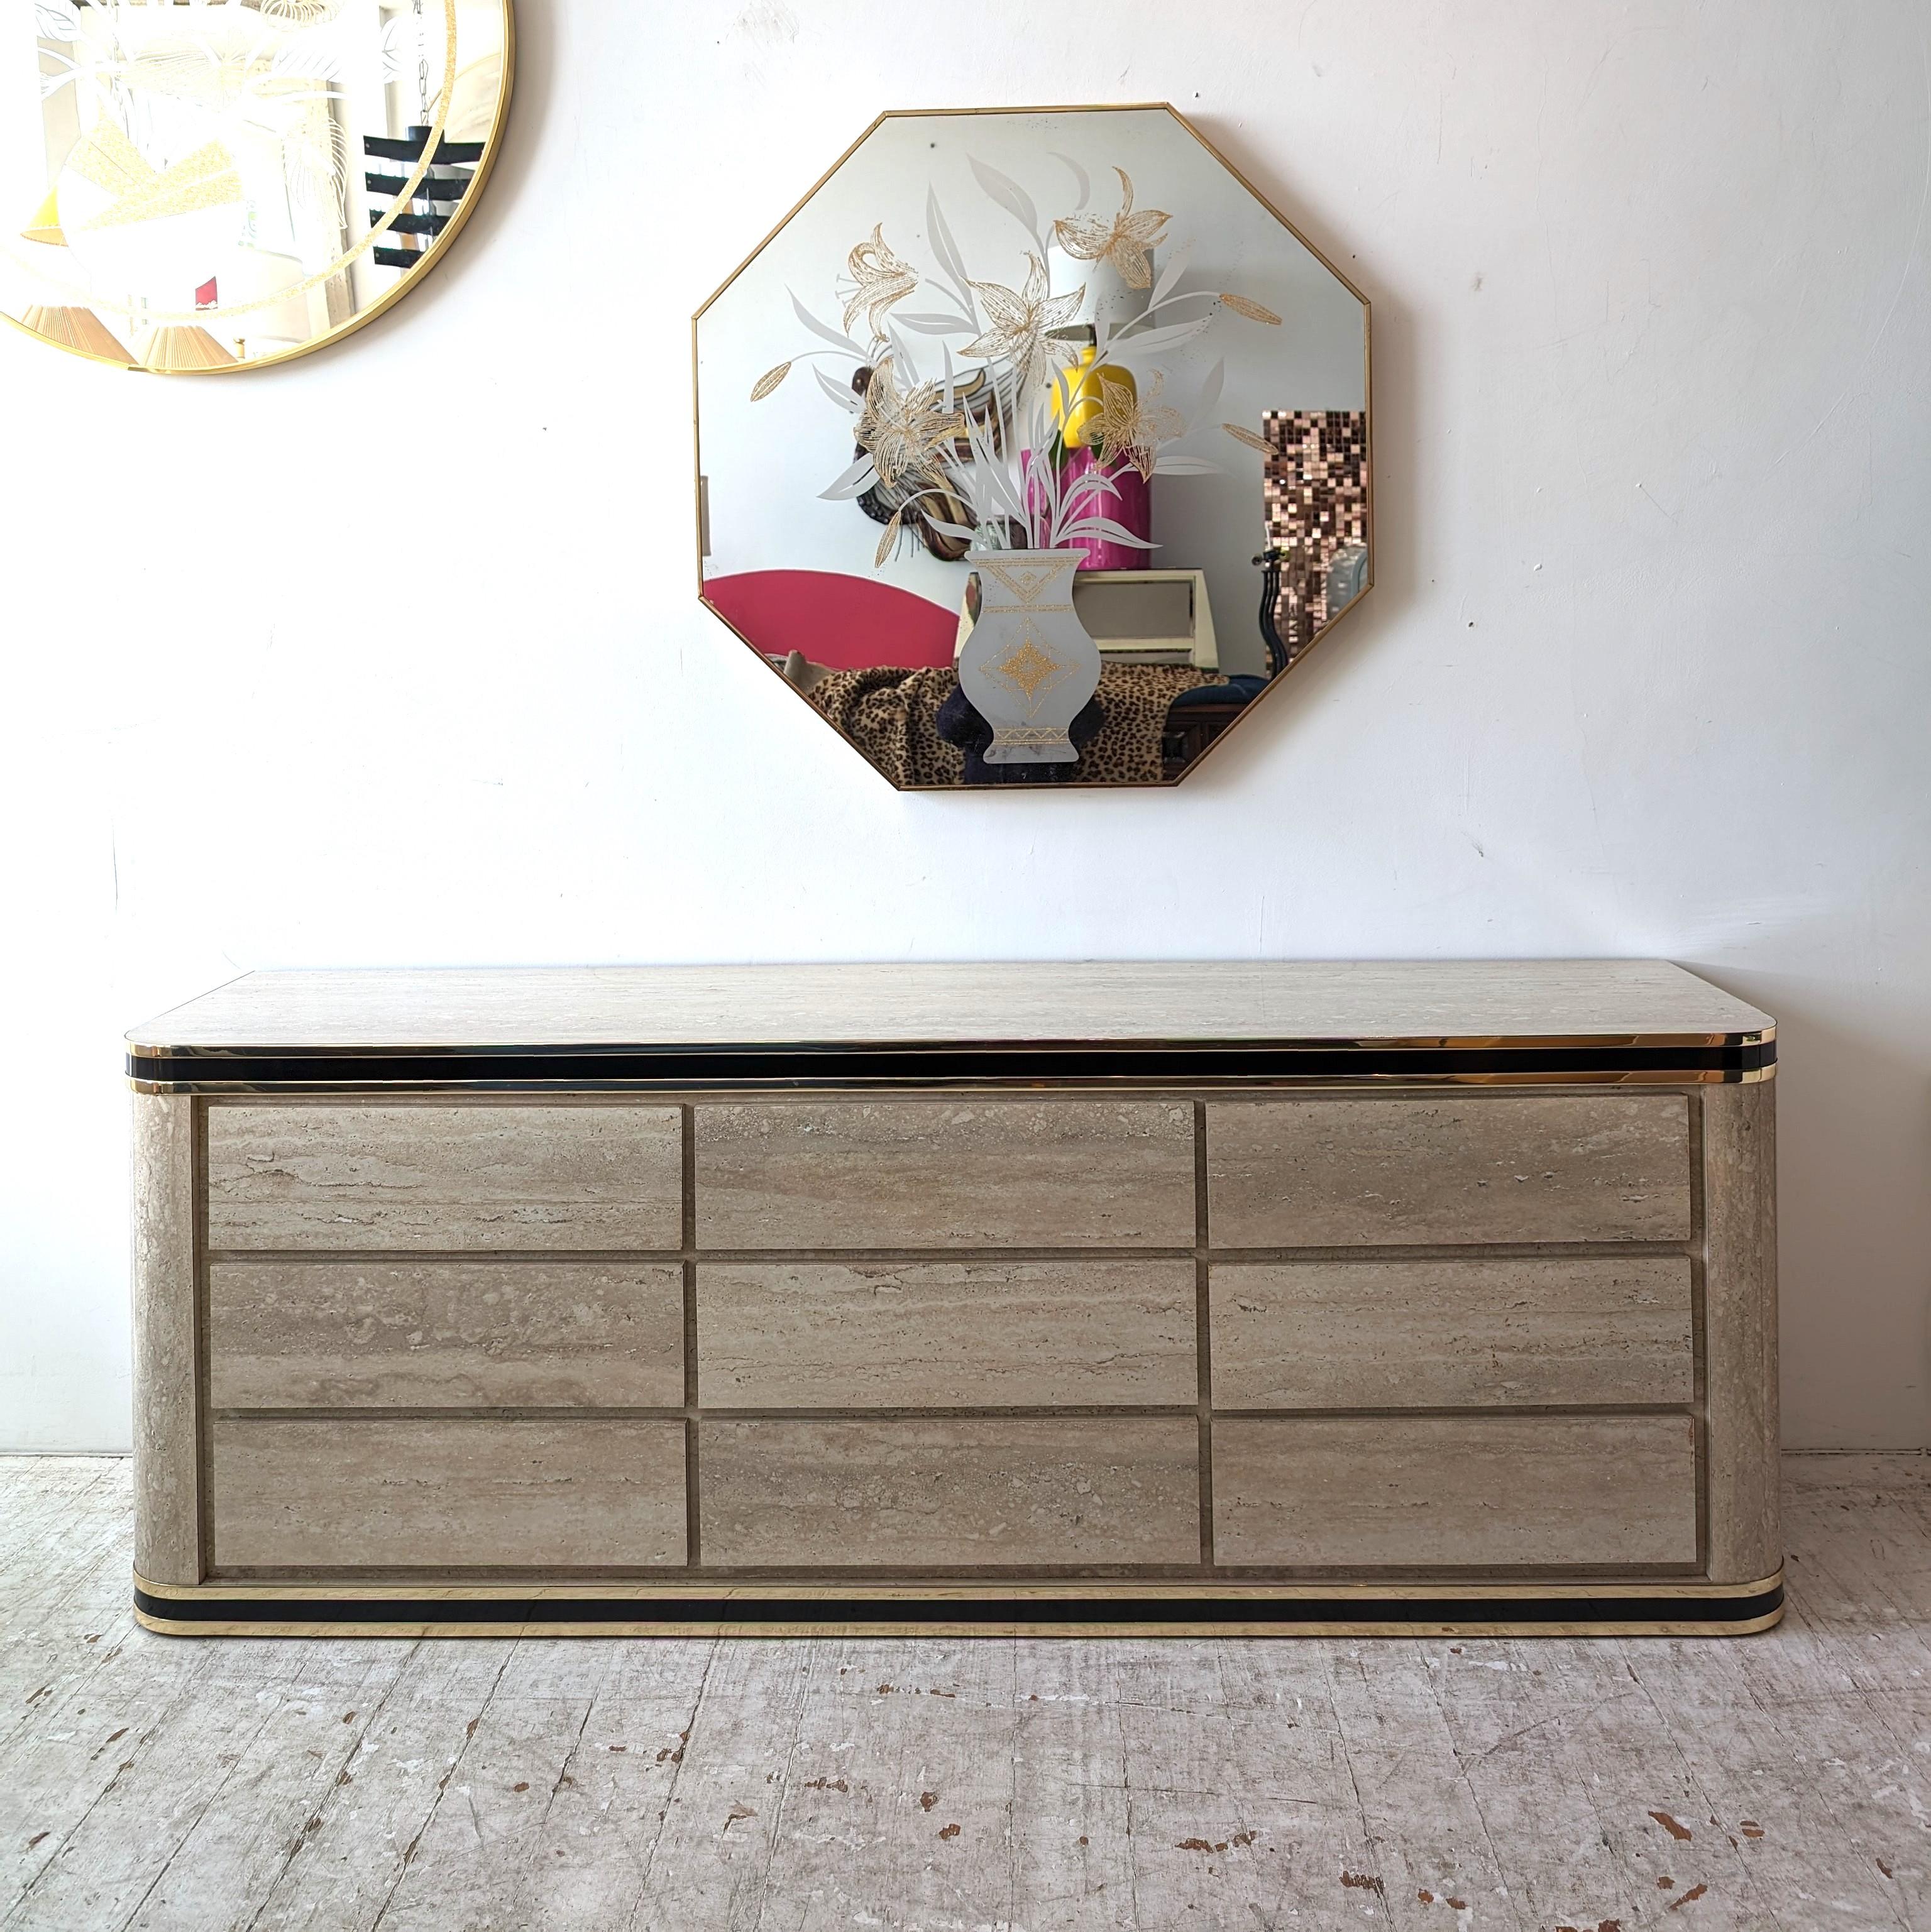 1980s American faux travertine laminate sideboard / dresser with nine wood-lined drawers. Gold & black trim top and bottom.
We also have matching bedside cabinets: please see our other listings.

Dimensions: width 194cm, depth 44cm, height 69cm